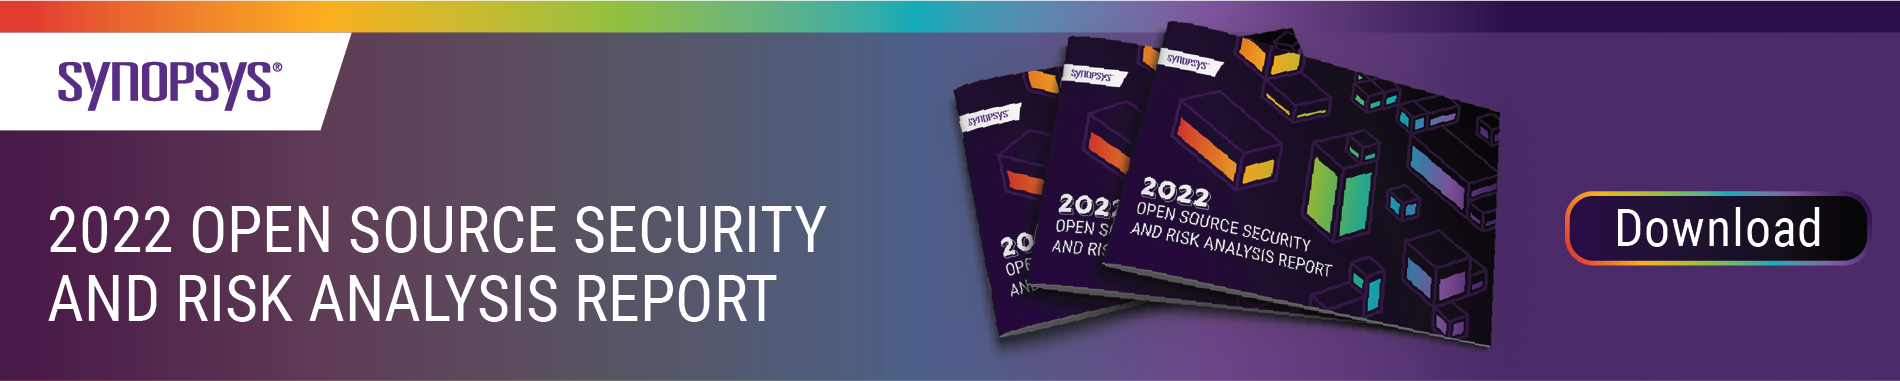 Download the 2022 OSSRA report | Synopsys